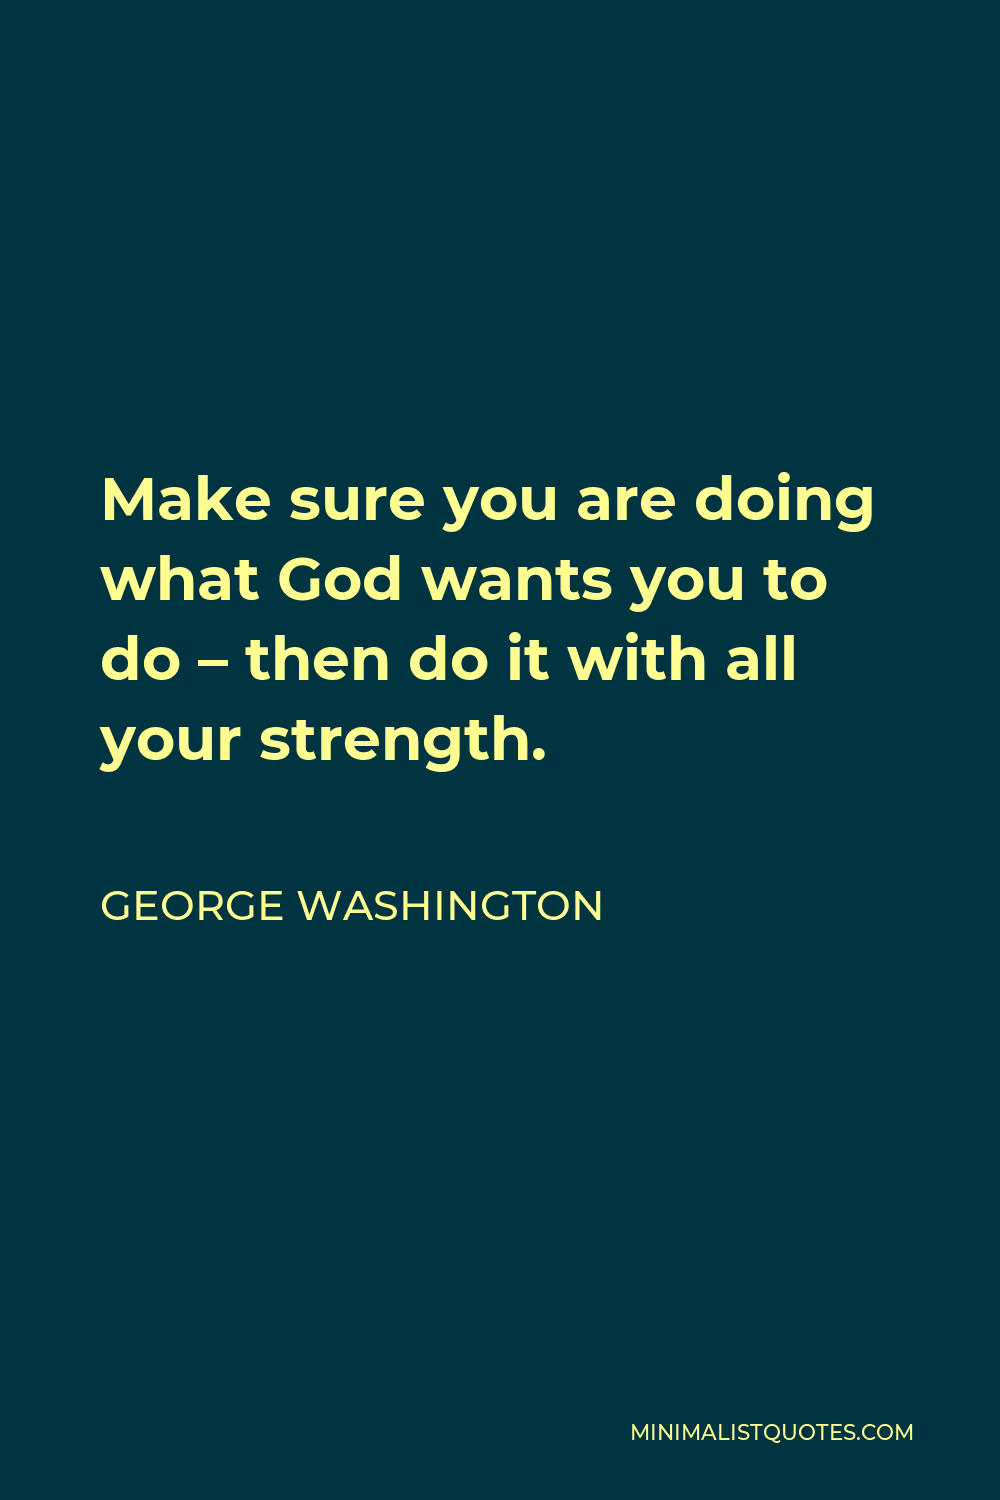 George Washington Quote - Make sure you are doing what God wants you to do – then do it with all your strength.